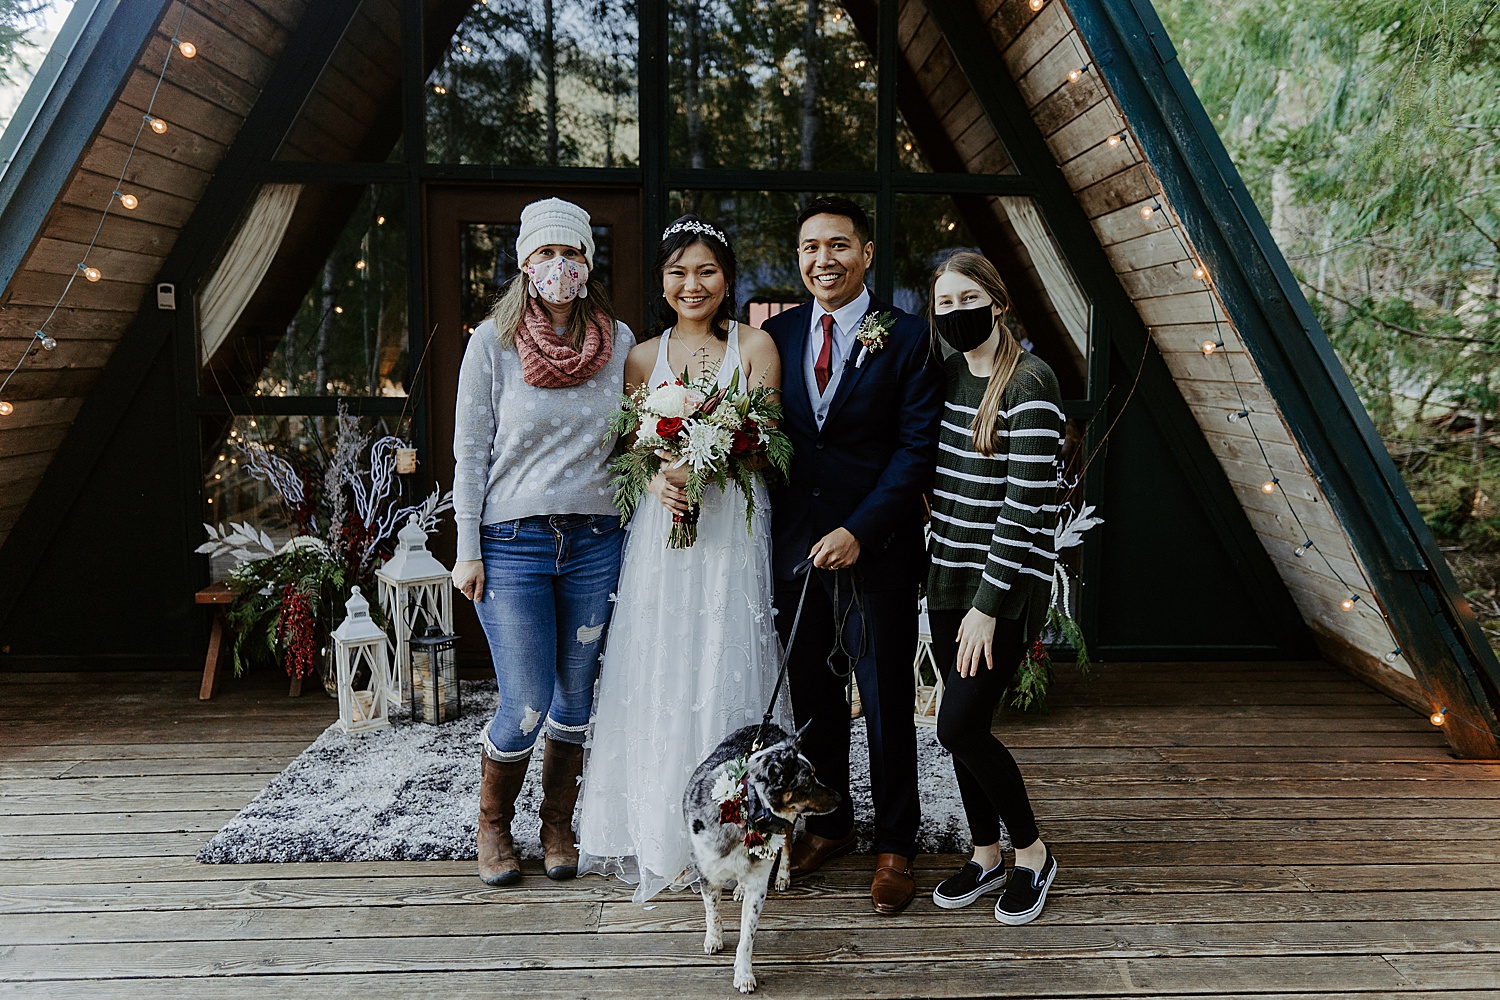 A-frame cabin elopement ceremony